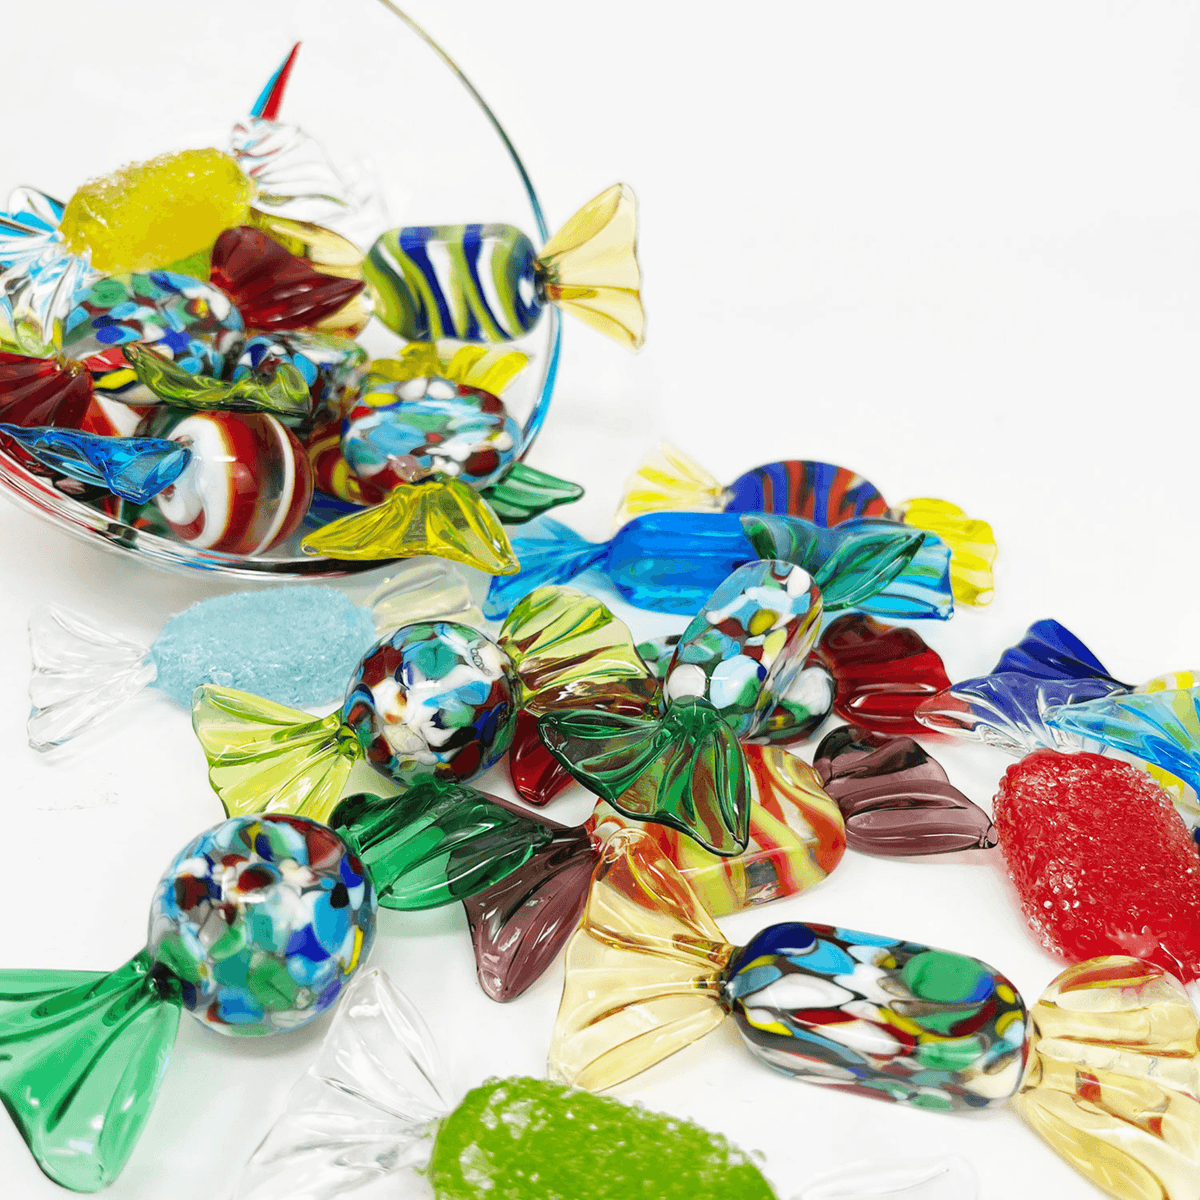 Murano Glass Candy, Classic, Set of 3, 5, or 10 Candies, Decorative Glass Sweets at MyItalianDecor